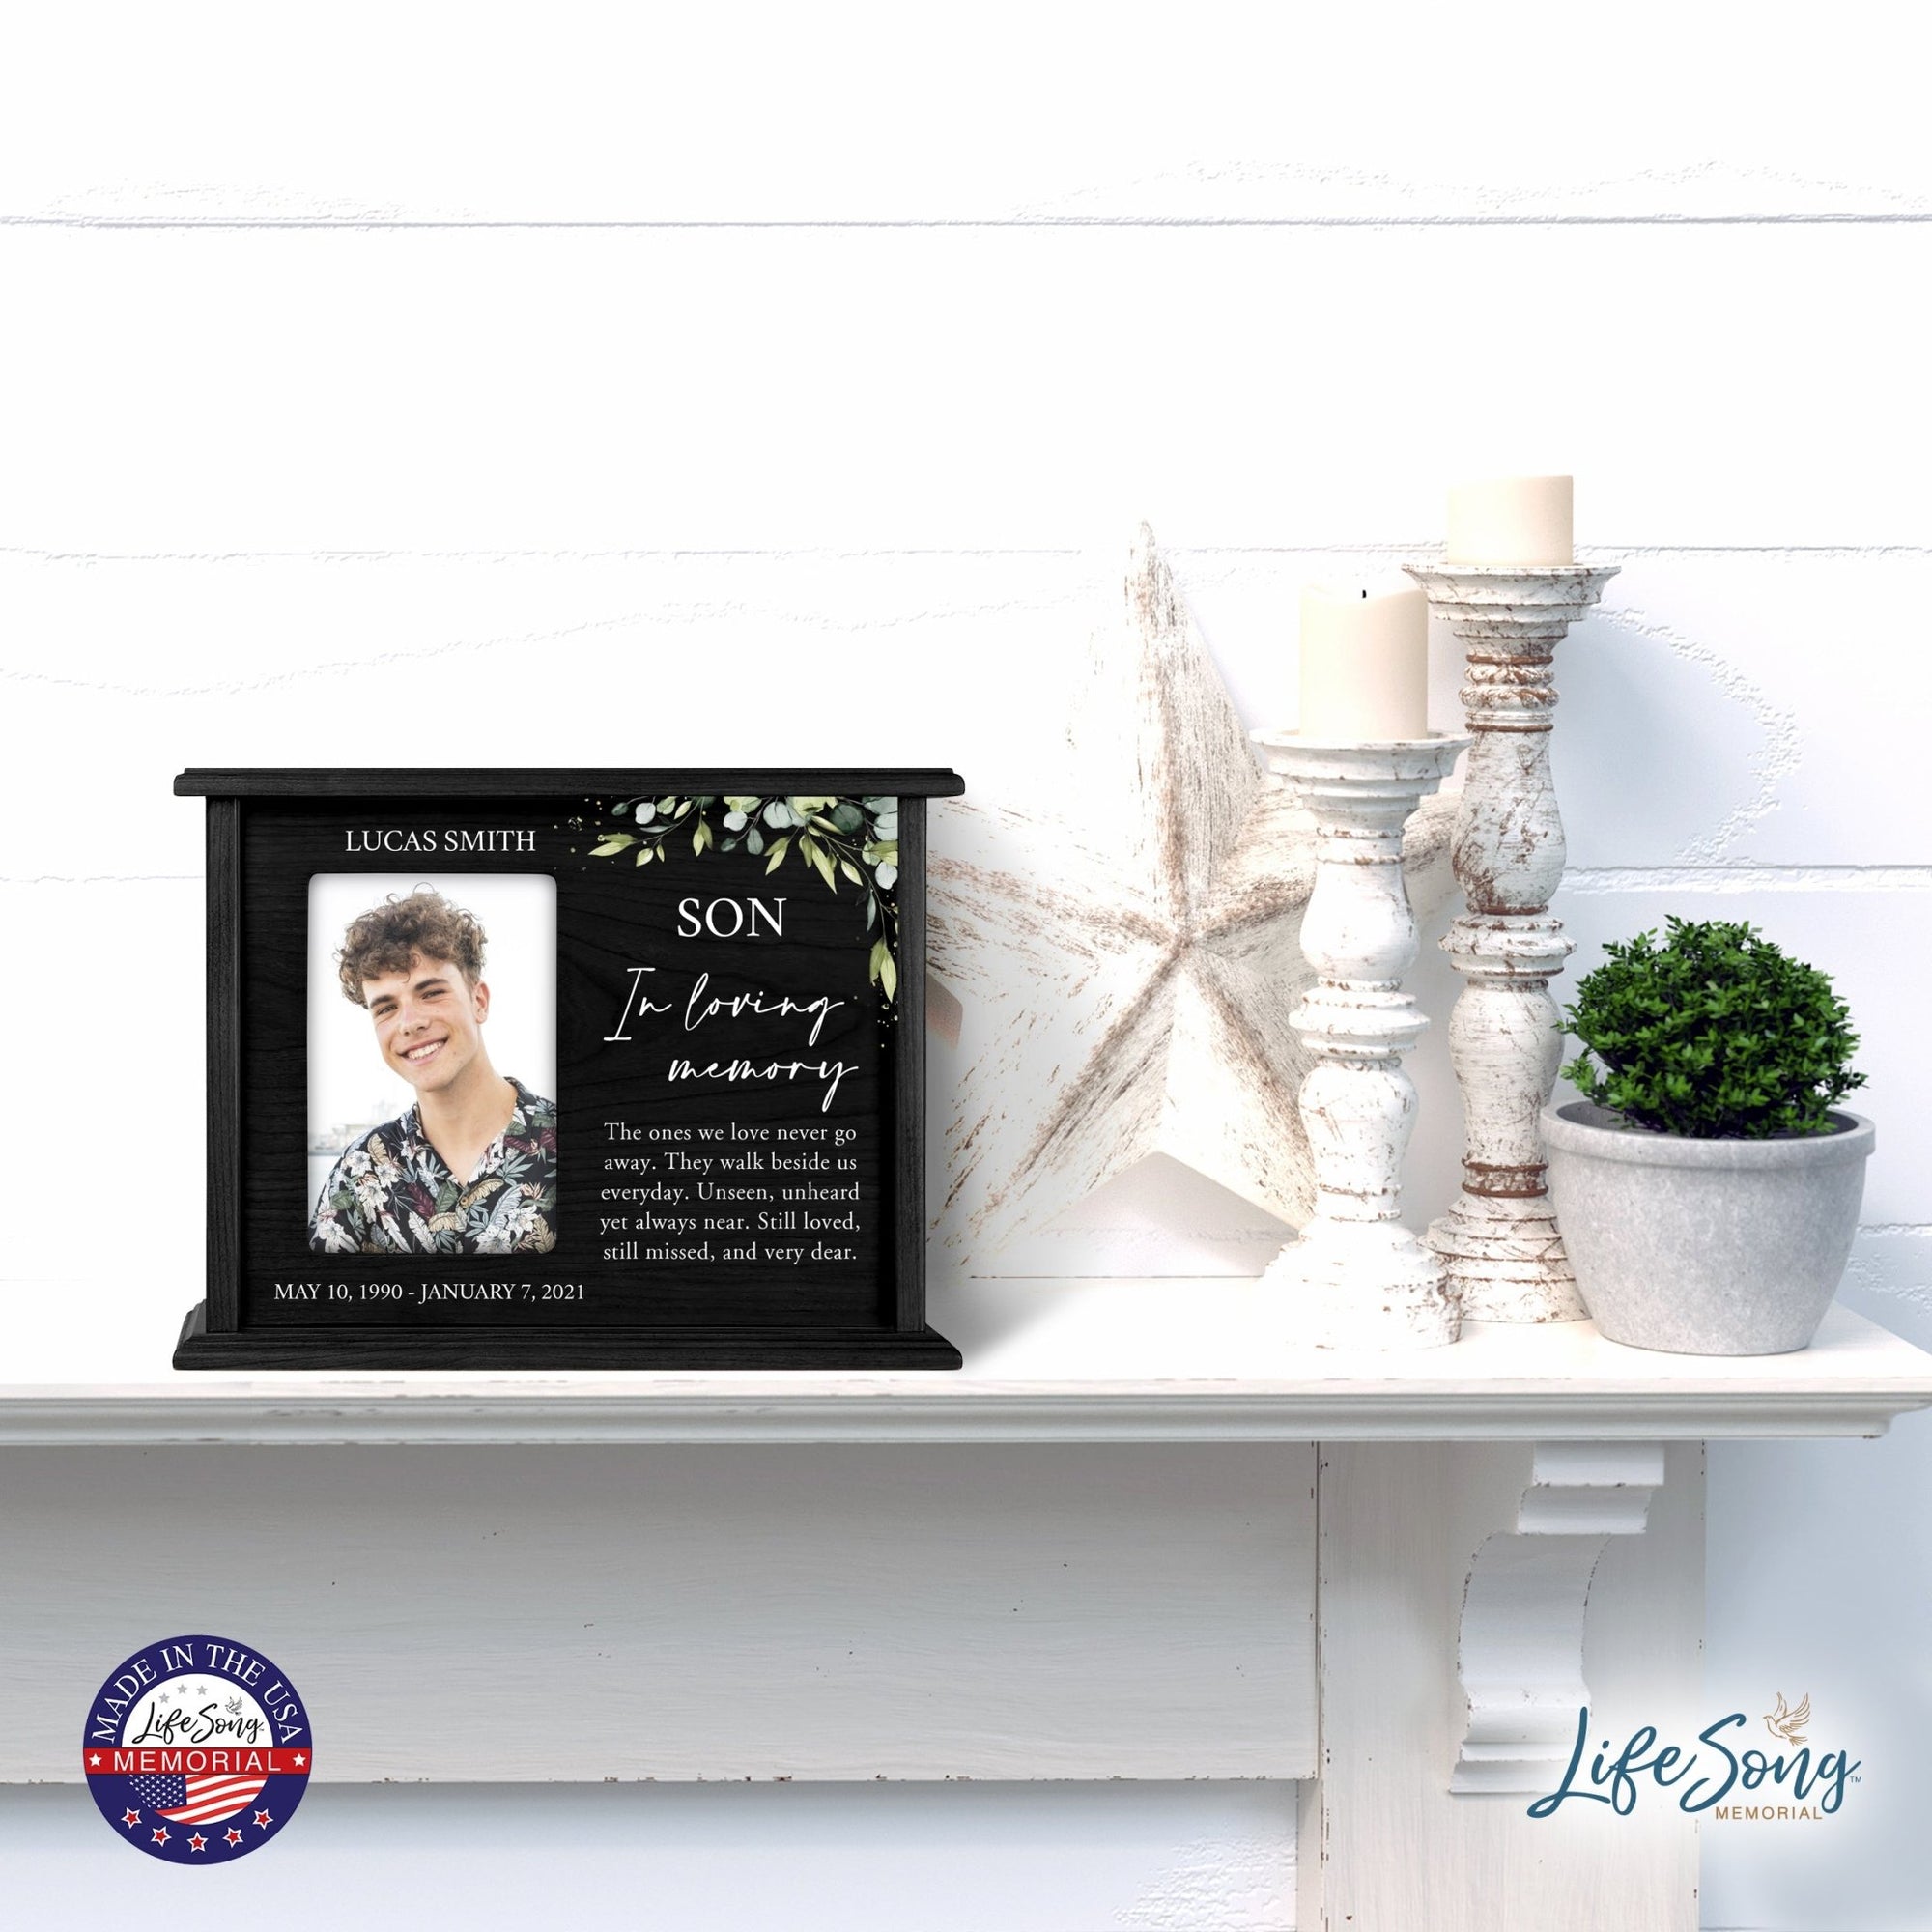 Personalized Memorial Cherry Wood 12 x 4.5 x 9 Cremation Urn Box with Picture Frame holds 200 cu in of Human Ashes and 4x6 Photo - In Loving Memory (Black) - LifeSong Milestones